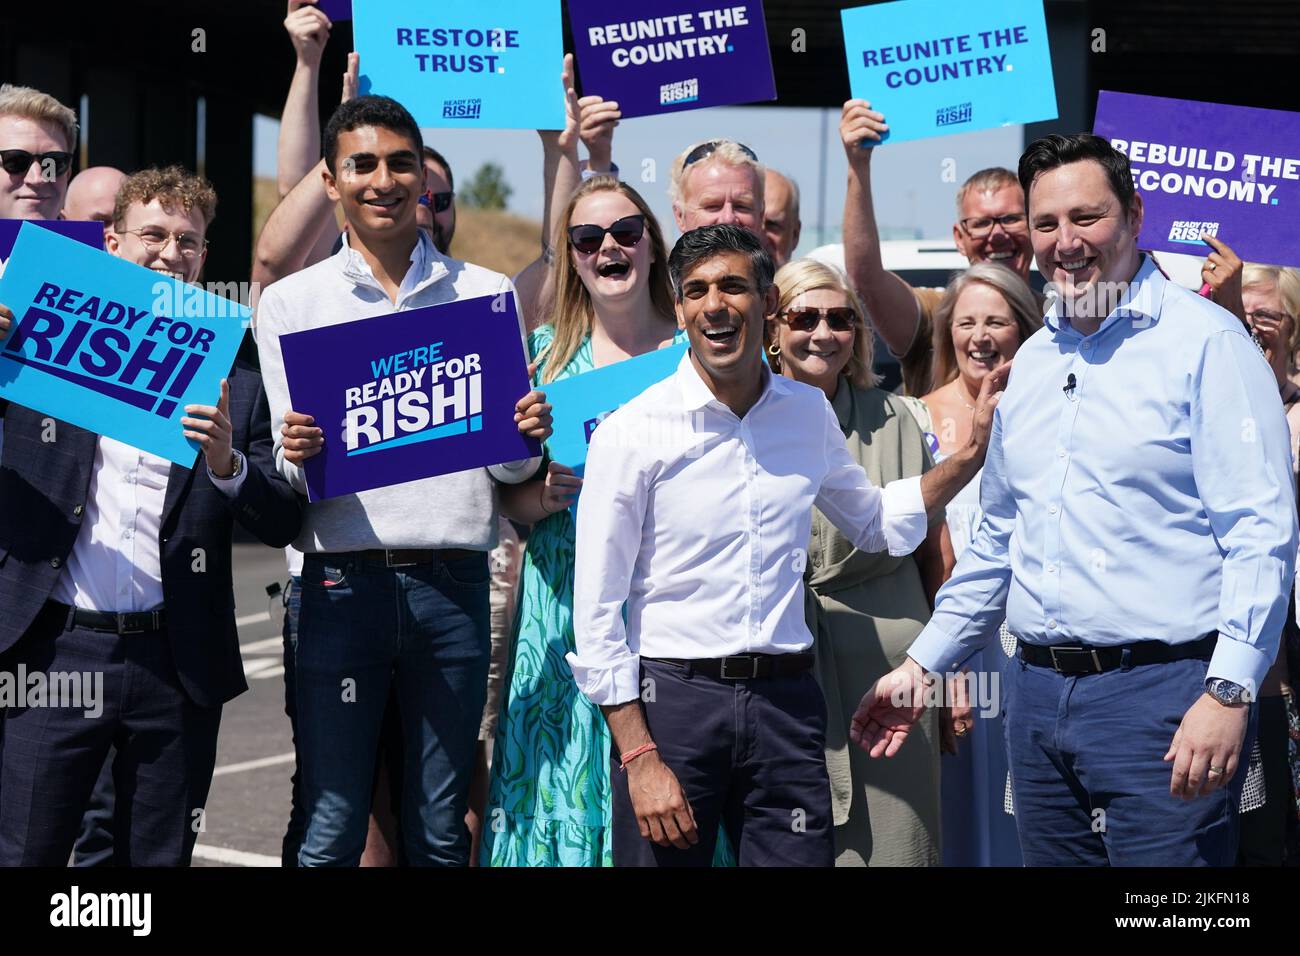 File photo dated 16/07/22 of Rishi Sunak (centre) with Tees Valley Mayor, Ben Houchen and supporters during a visit to Teesside Freeport, Teesworks, in Redcar, Teeside. Mr Houchen has said he is 'speechless' at Liz Truss' plan to cut public sector pay in less expensive parts of the country. The Foreign Secretary set out plans to end national pay deals, meaning that wages could be cut in areas where the cost of living is lower. Mr Houchen, who is supporting Rishi Sunak's leadership bid, said the plan would undo some of the 'levelling up' work to boost regions such as Teesside. Issue date: Tuesd Stock Photo